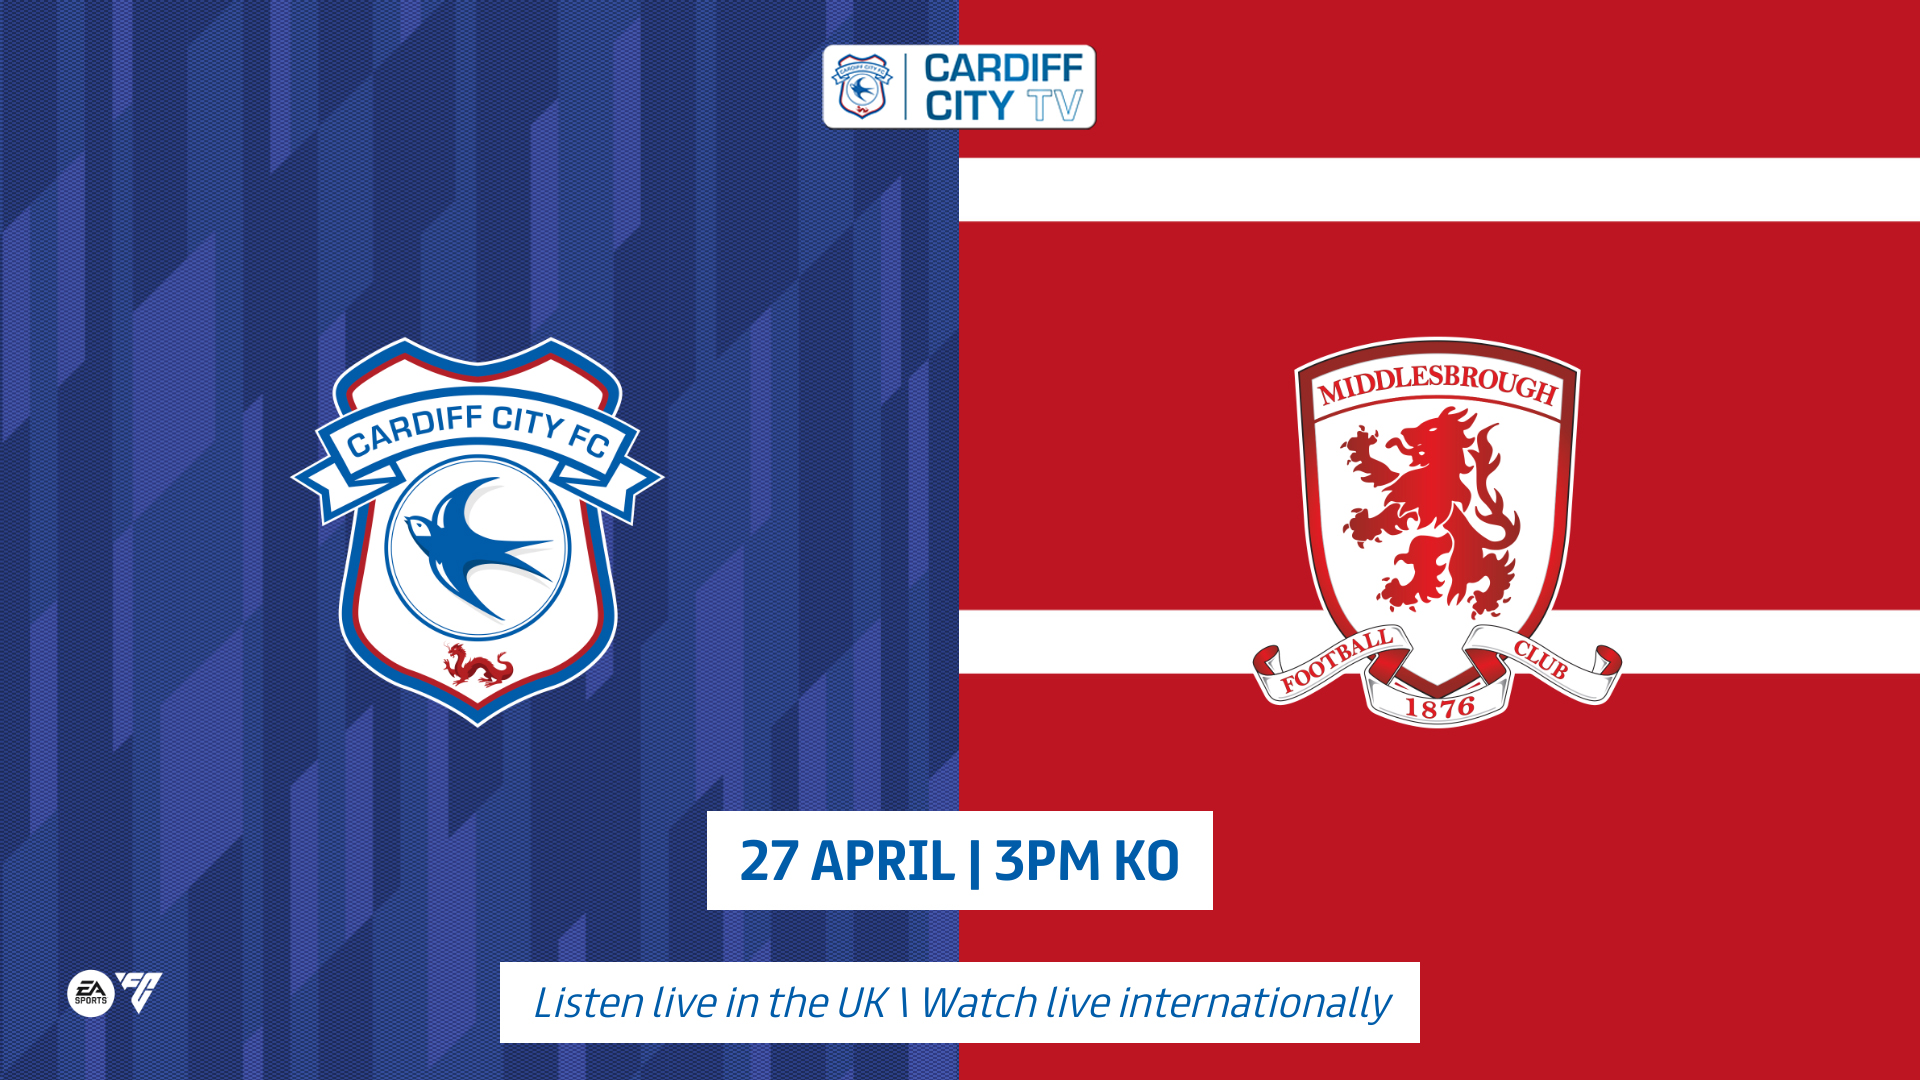 Cardiff City TV | Middlesbrough (H)